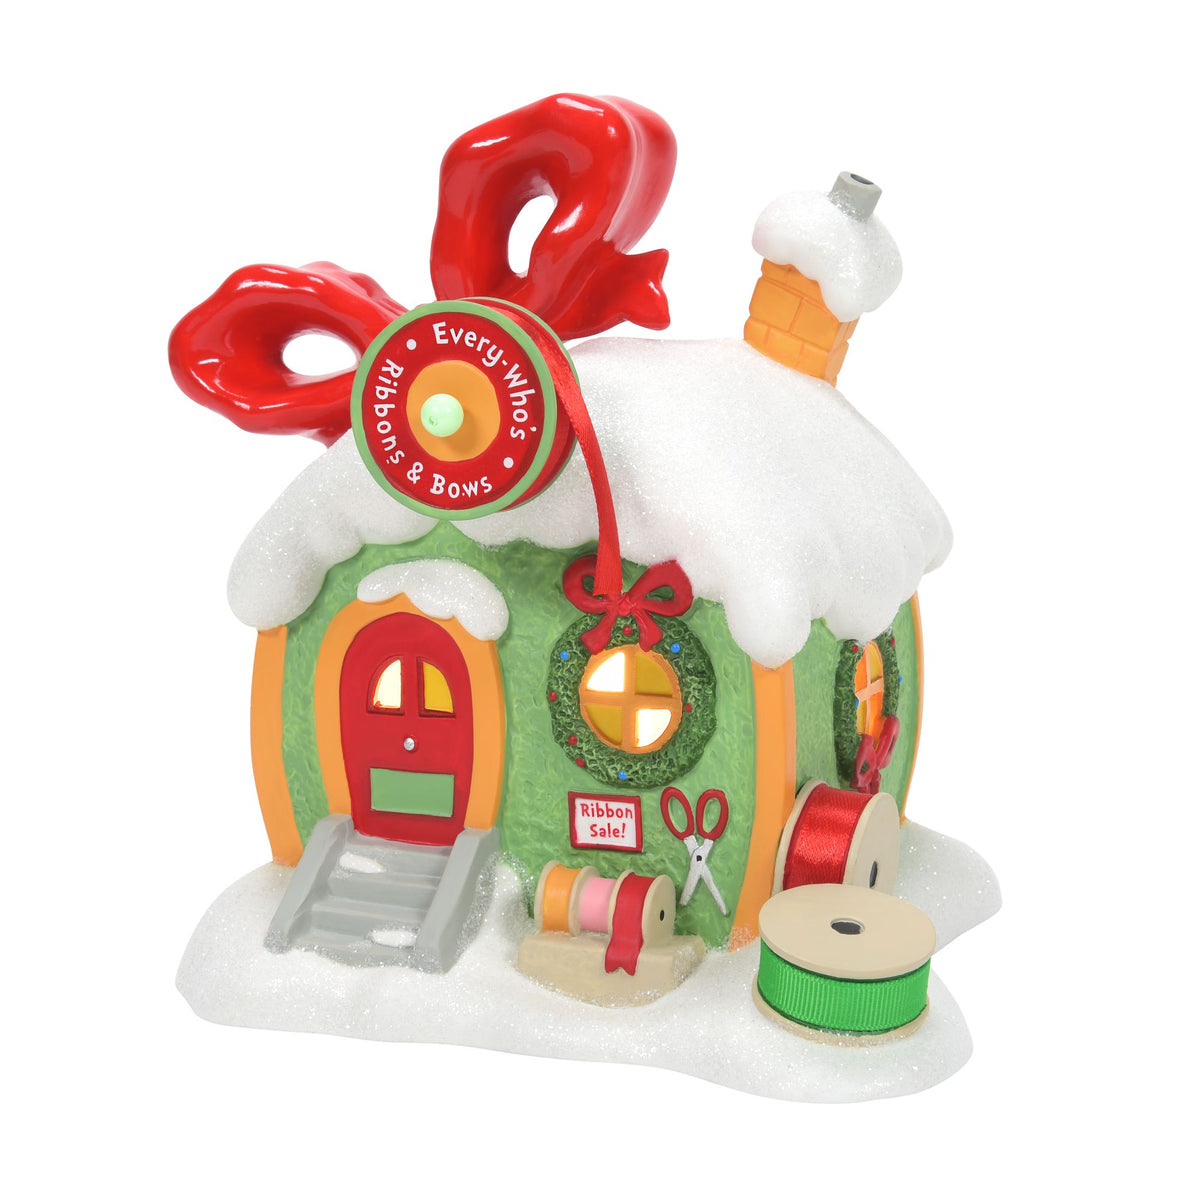 Department 56 Every Who's Ribbon & Bows Grinch villages